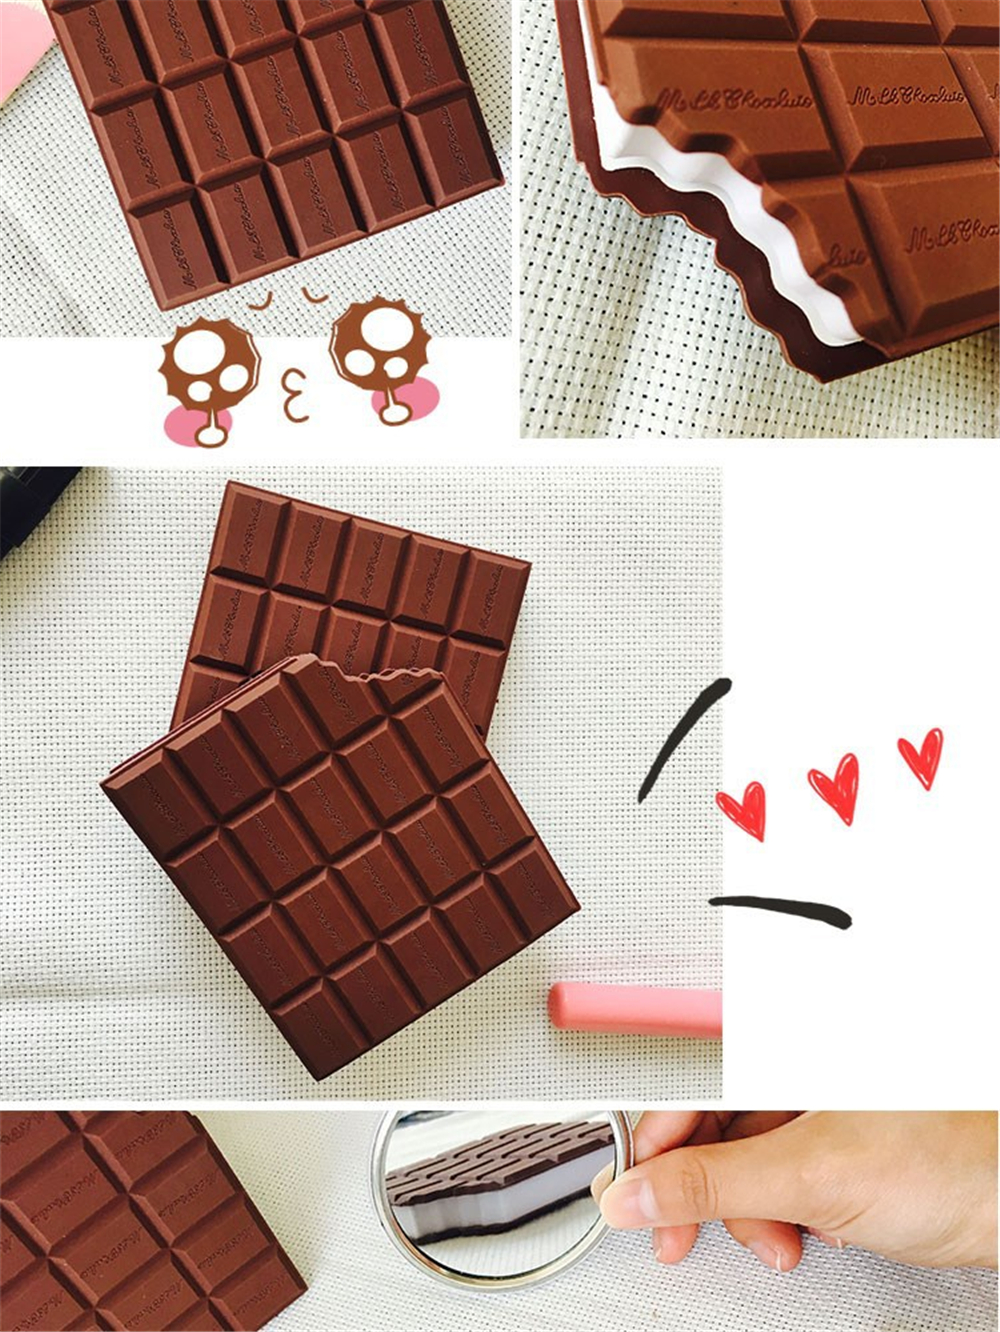 Chocolate-Stickers-Book-Creative-Chocolate-Cookies-Shape-Memo-Sticker-Pad-Dairy-Note-Notebook-For-Of-1764050-11